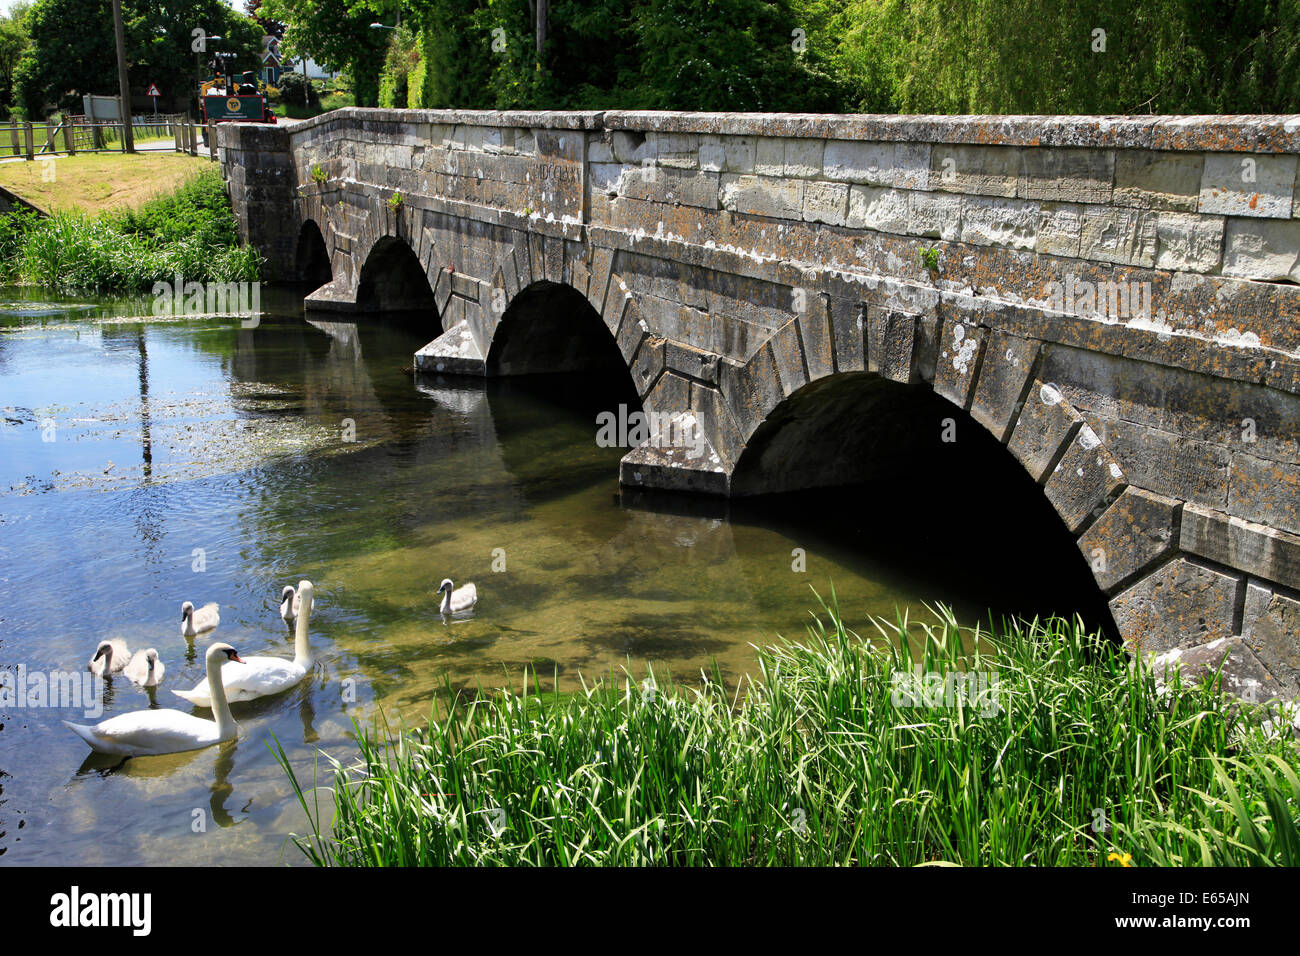 Swans and cygnets on the River Avon beside Queensbury Bridge in Amesbury, Wiltshire, England. Stock Photo